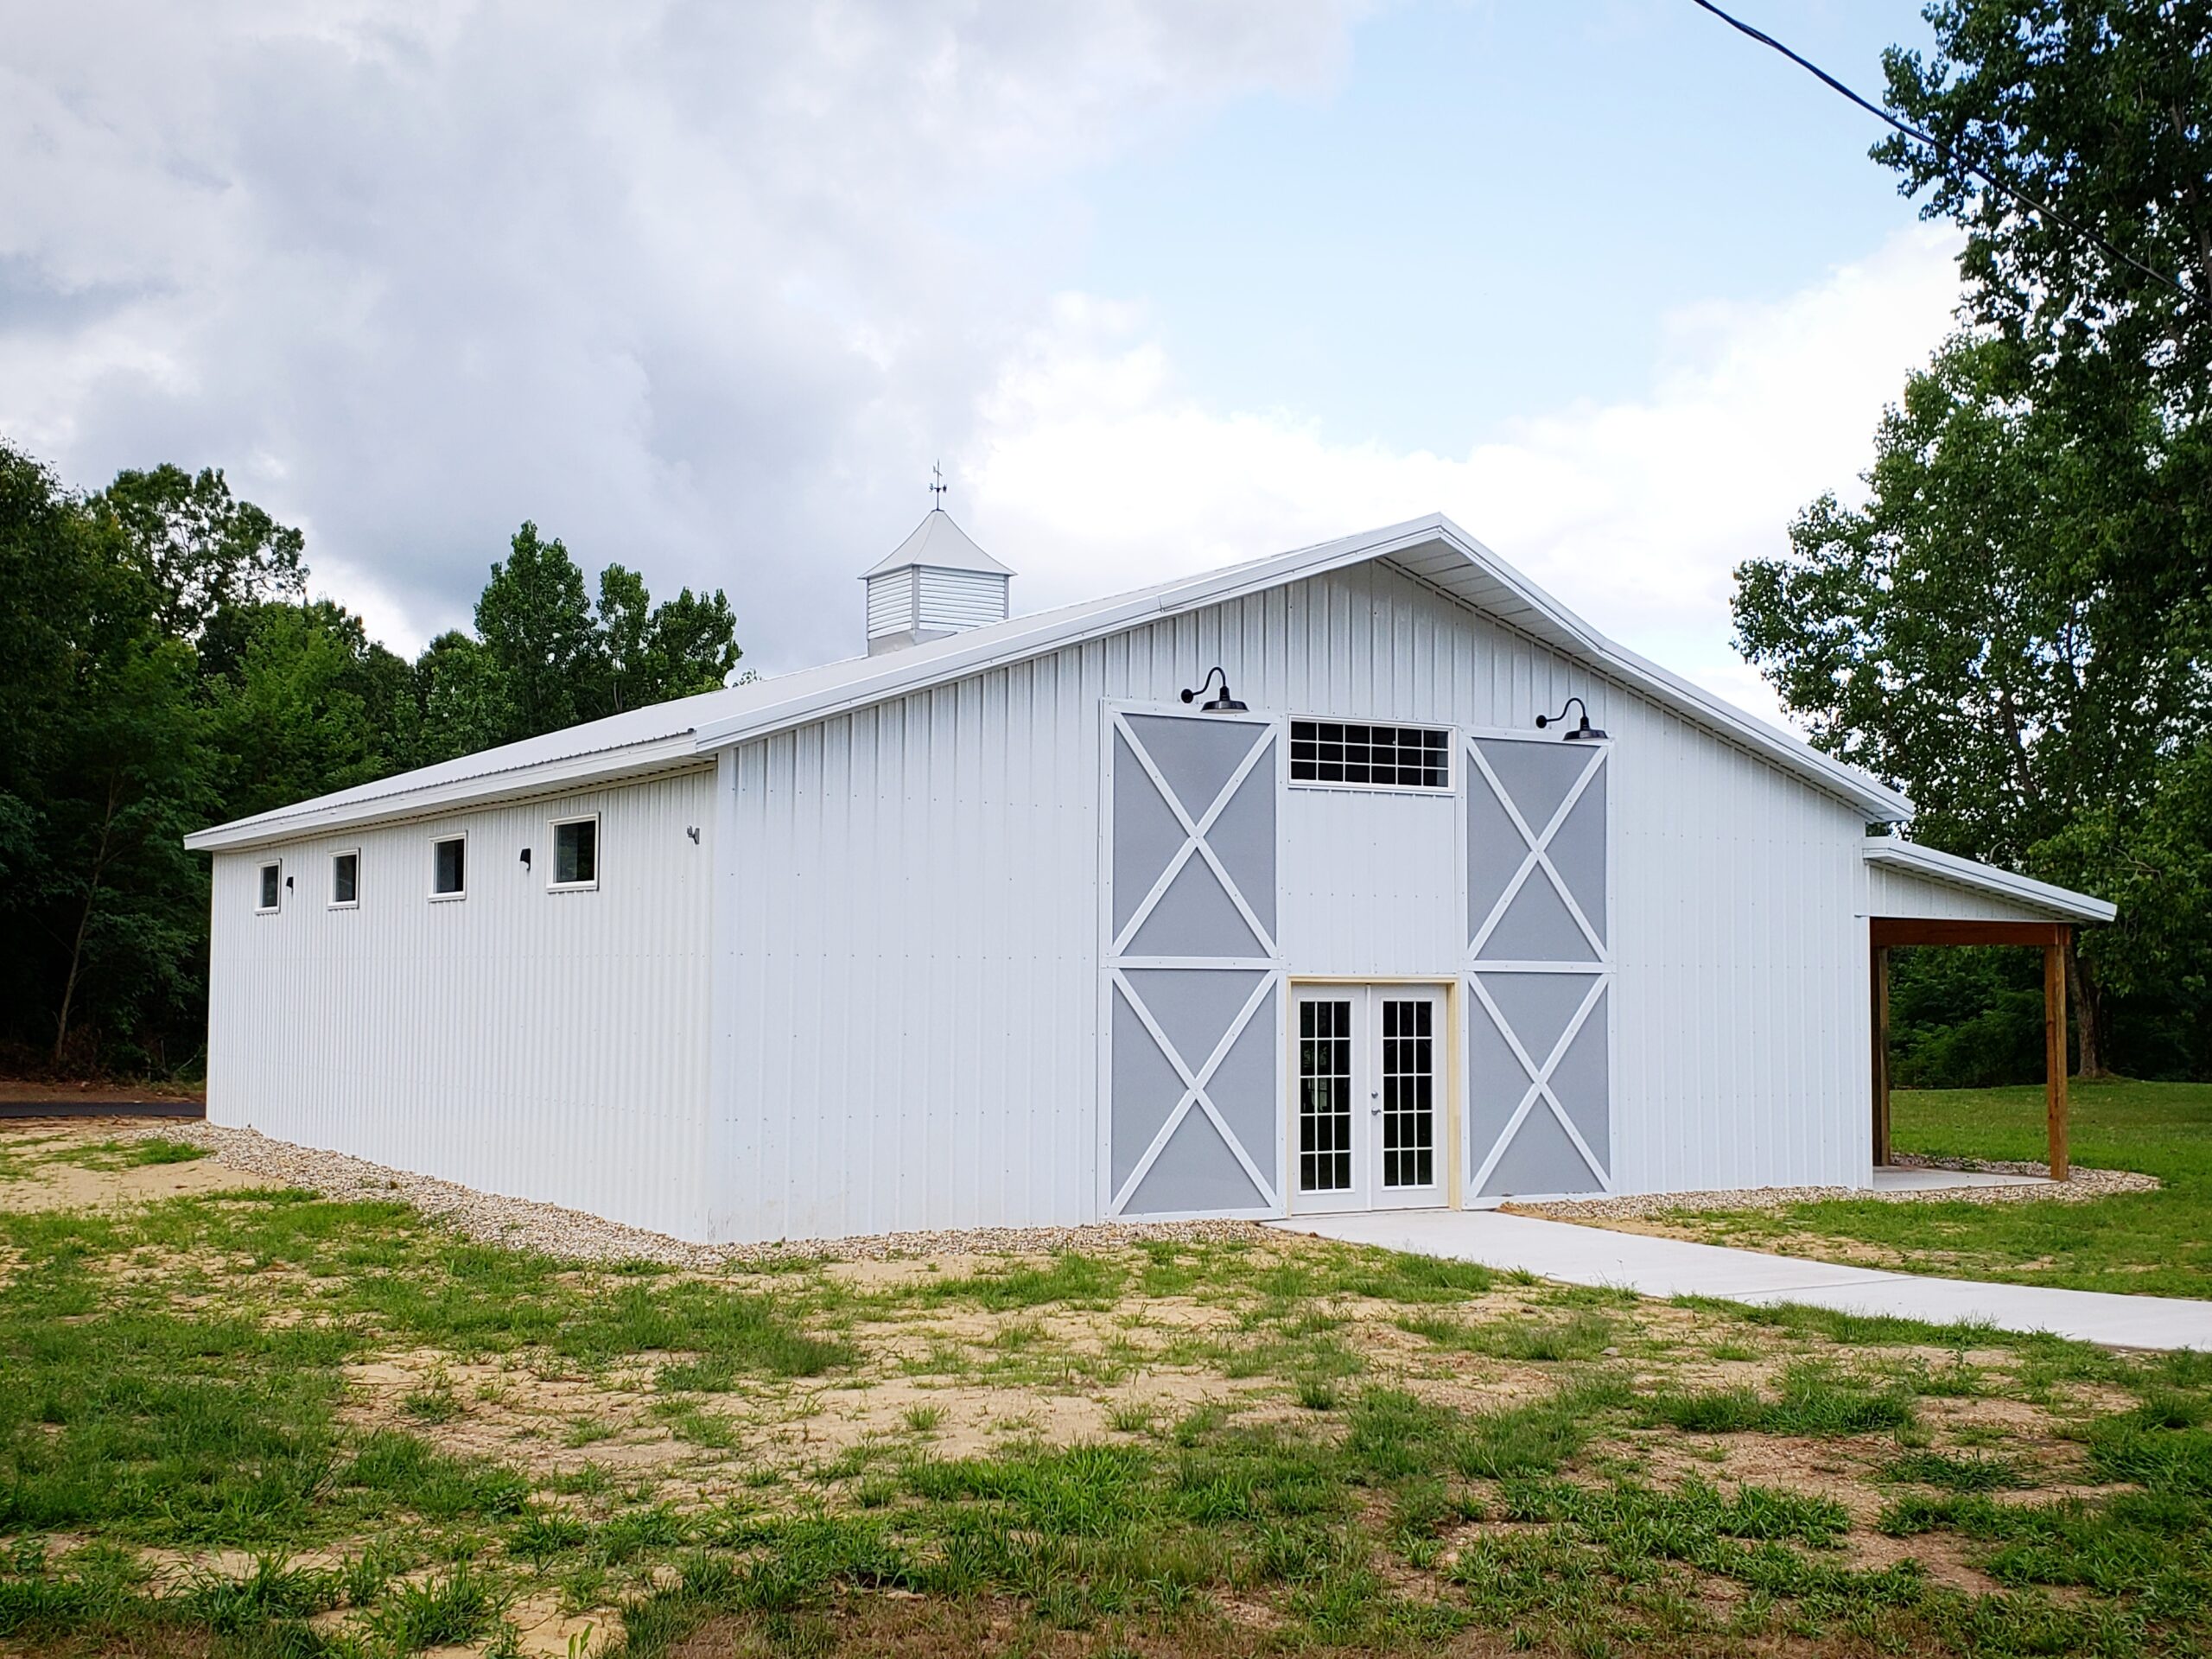 Planning for a pole barn - Image